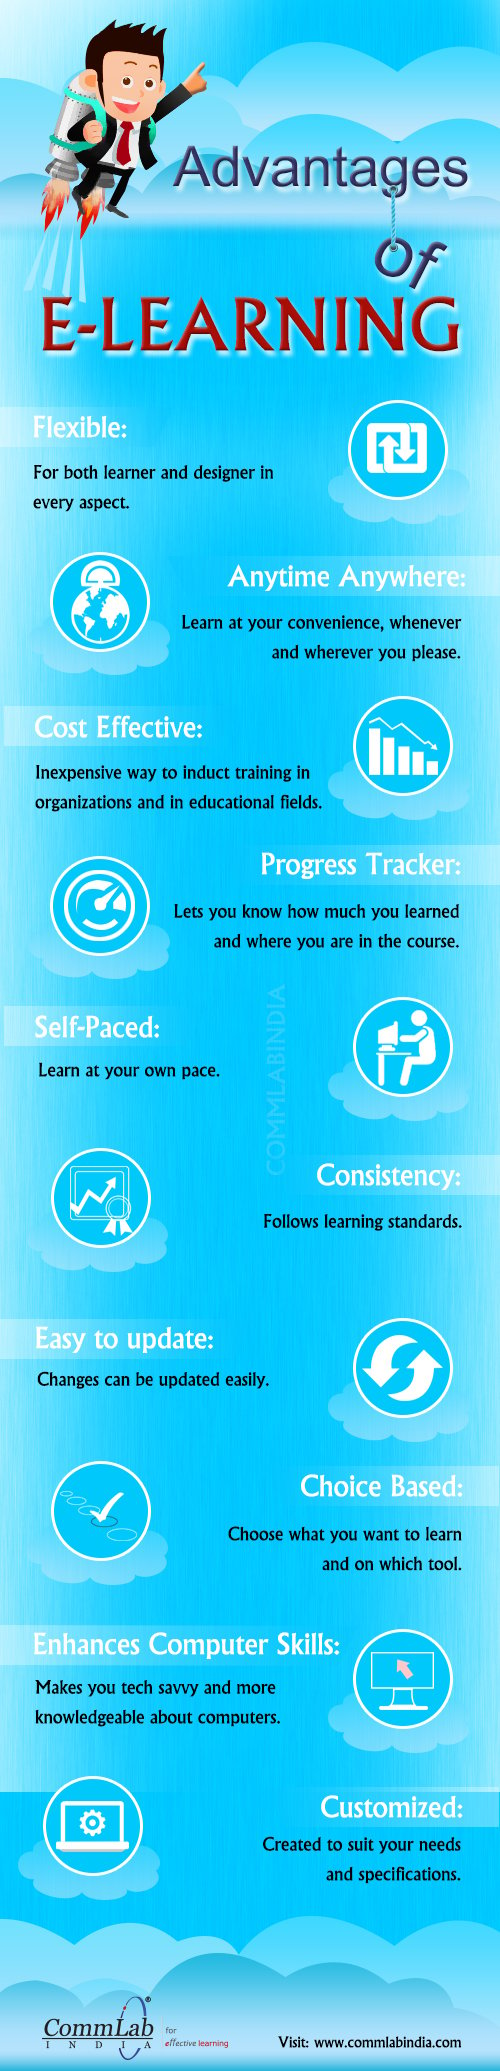 Advantages of E-learning - An Infographic